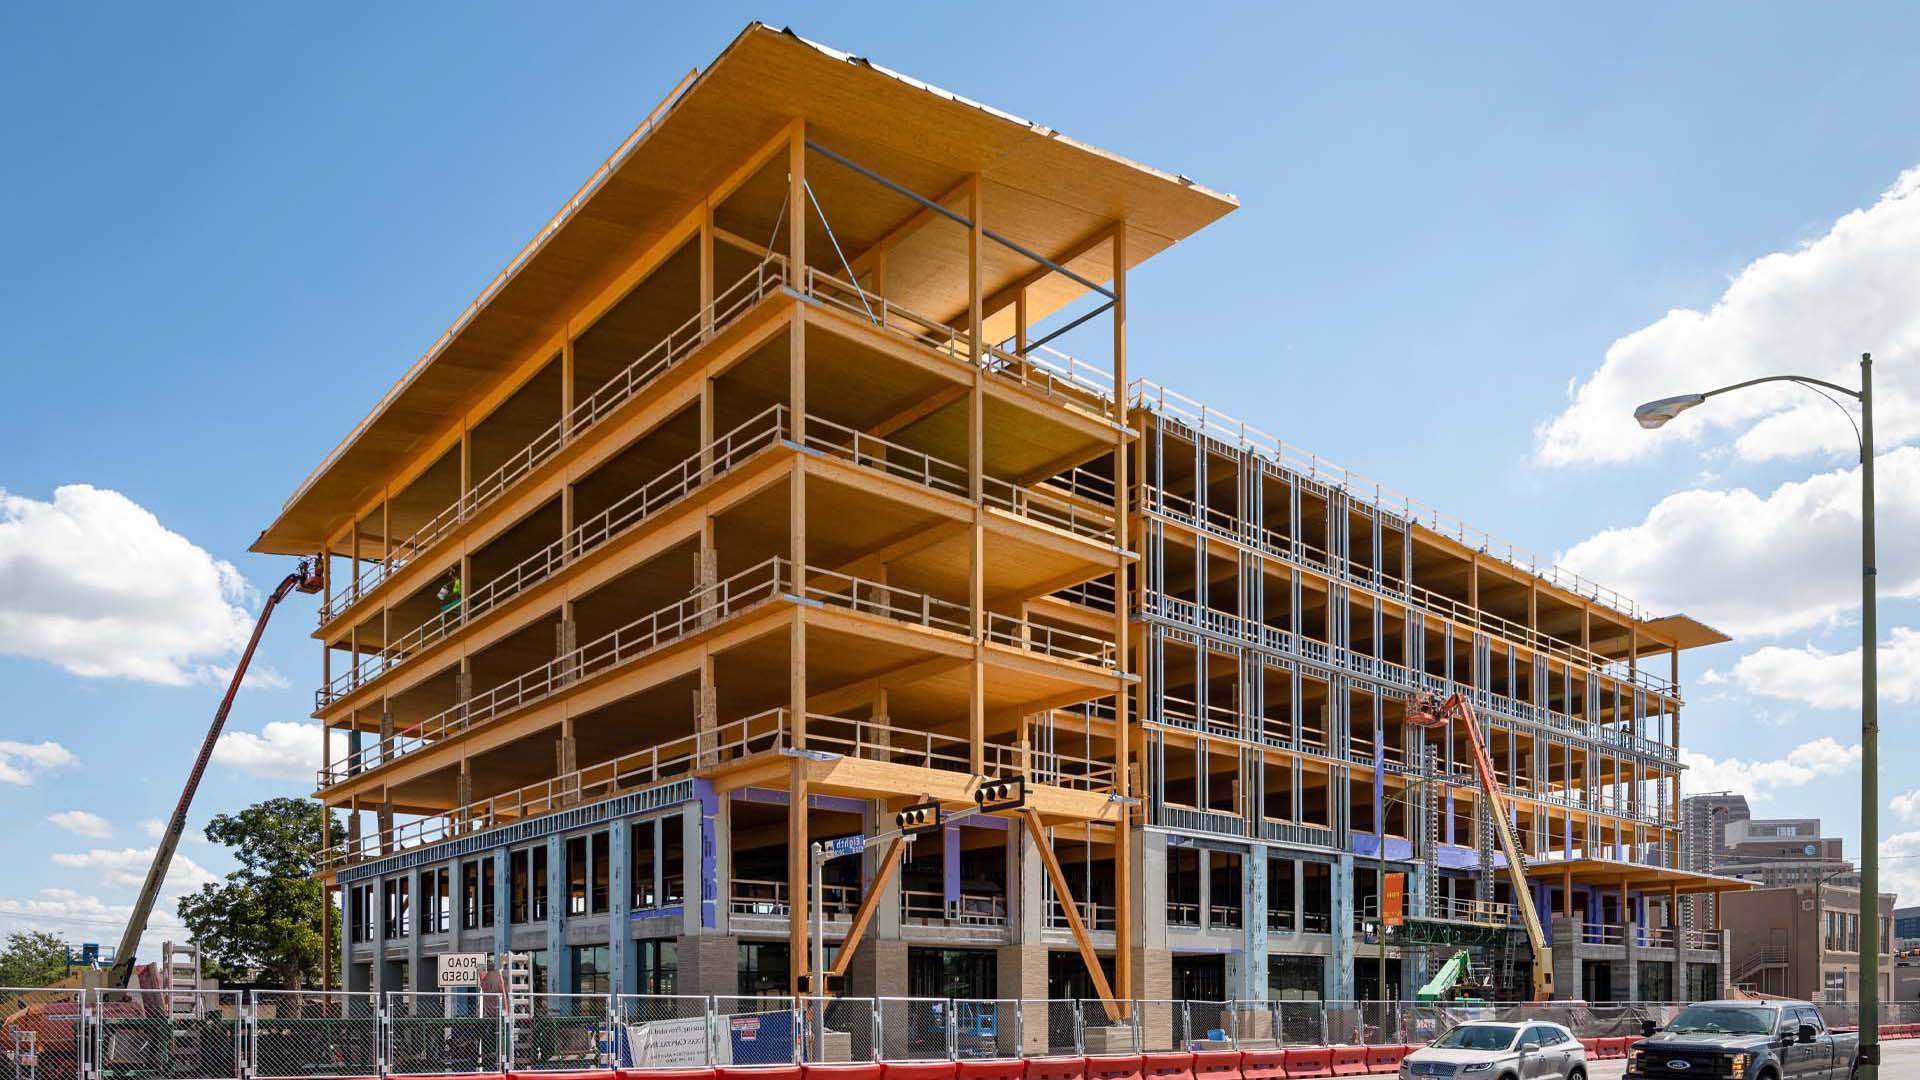 Mass Timber Construction Project in Progress